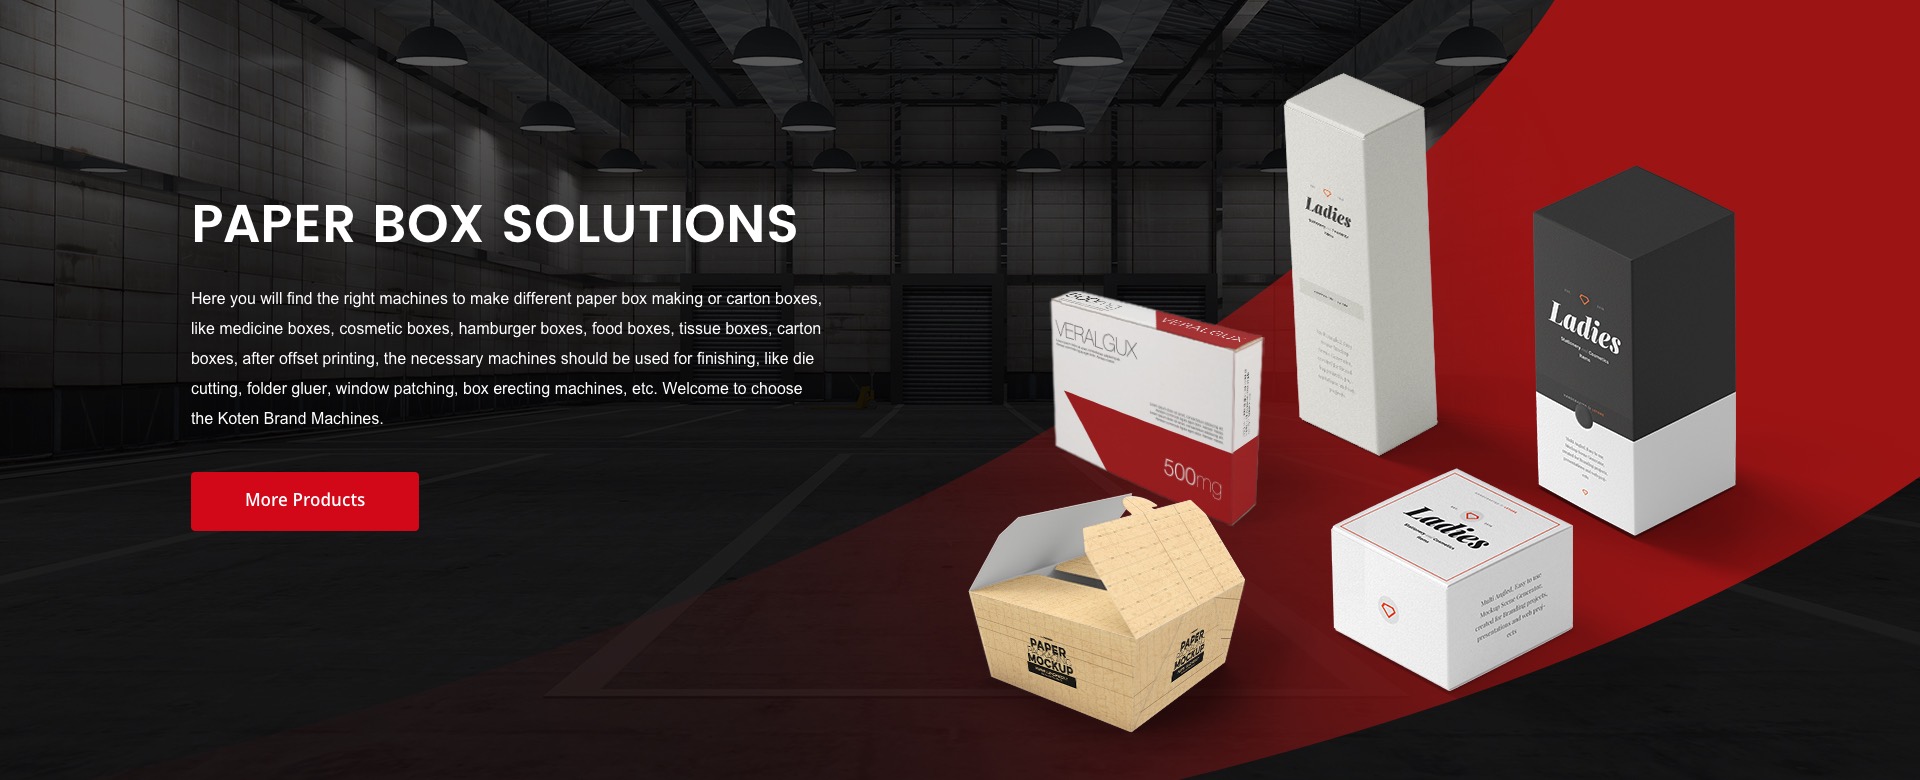 paper box solutions